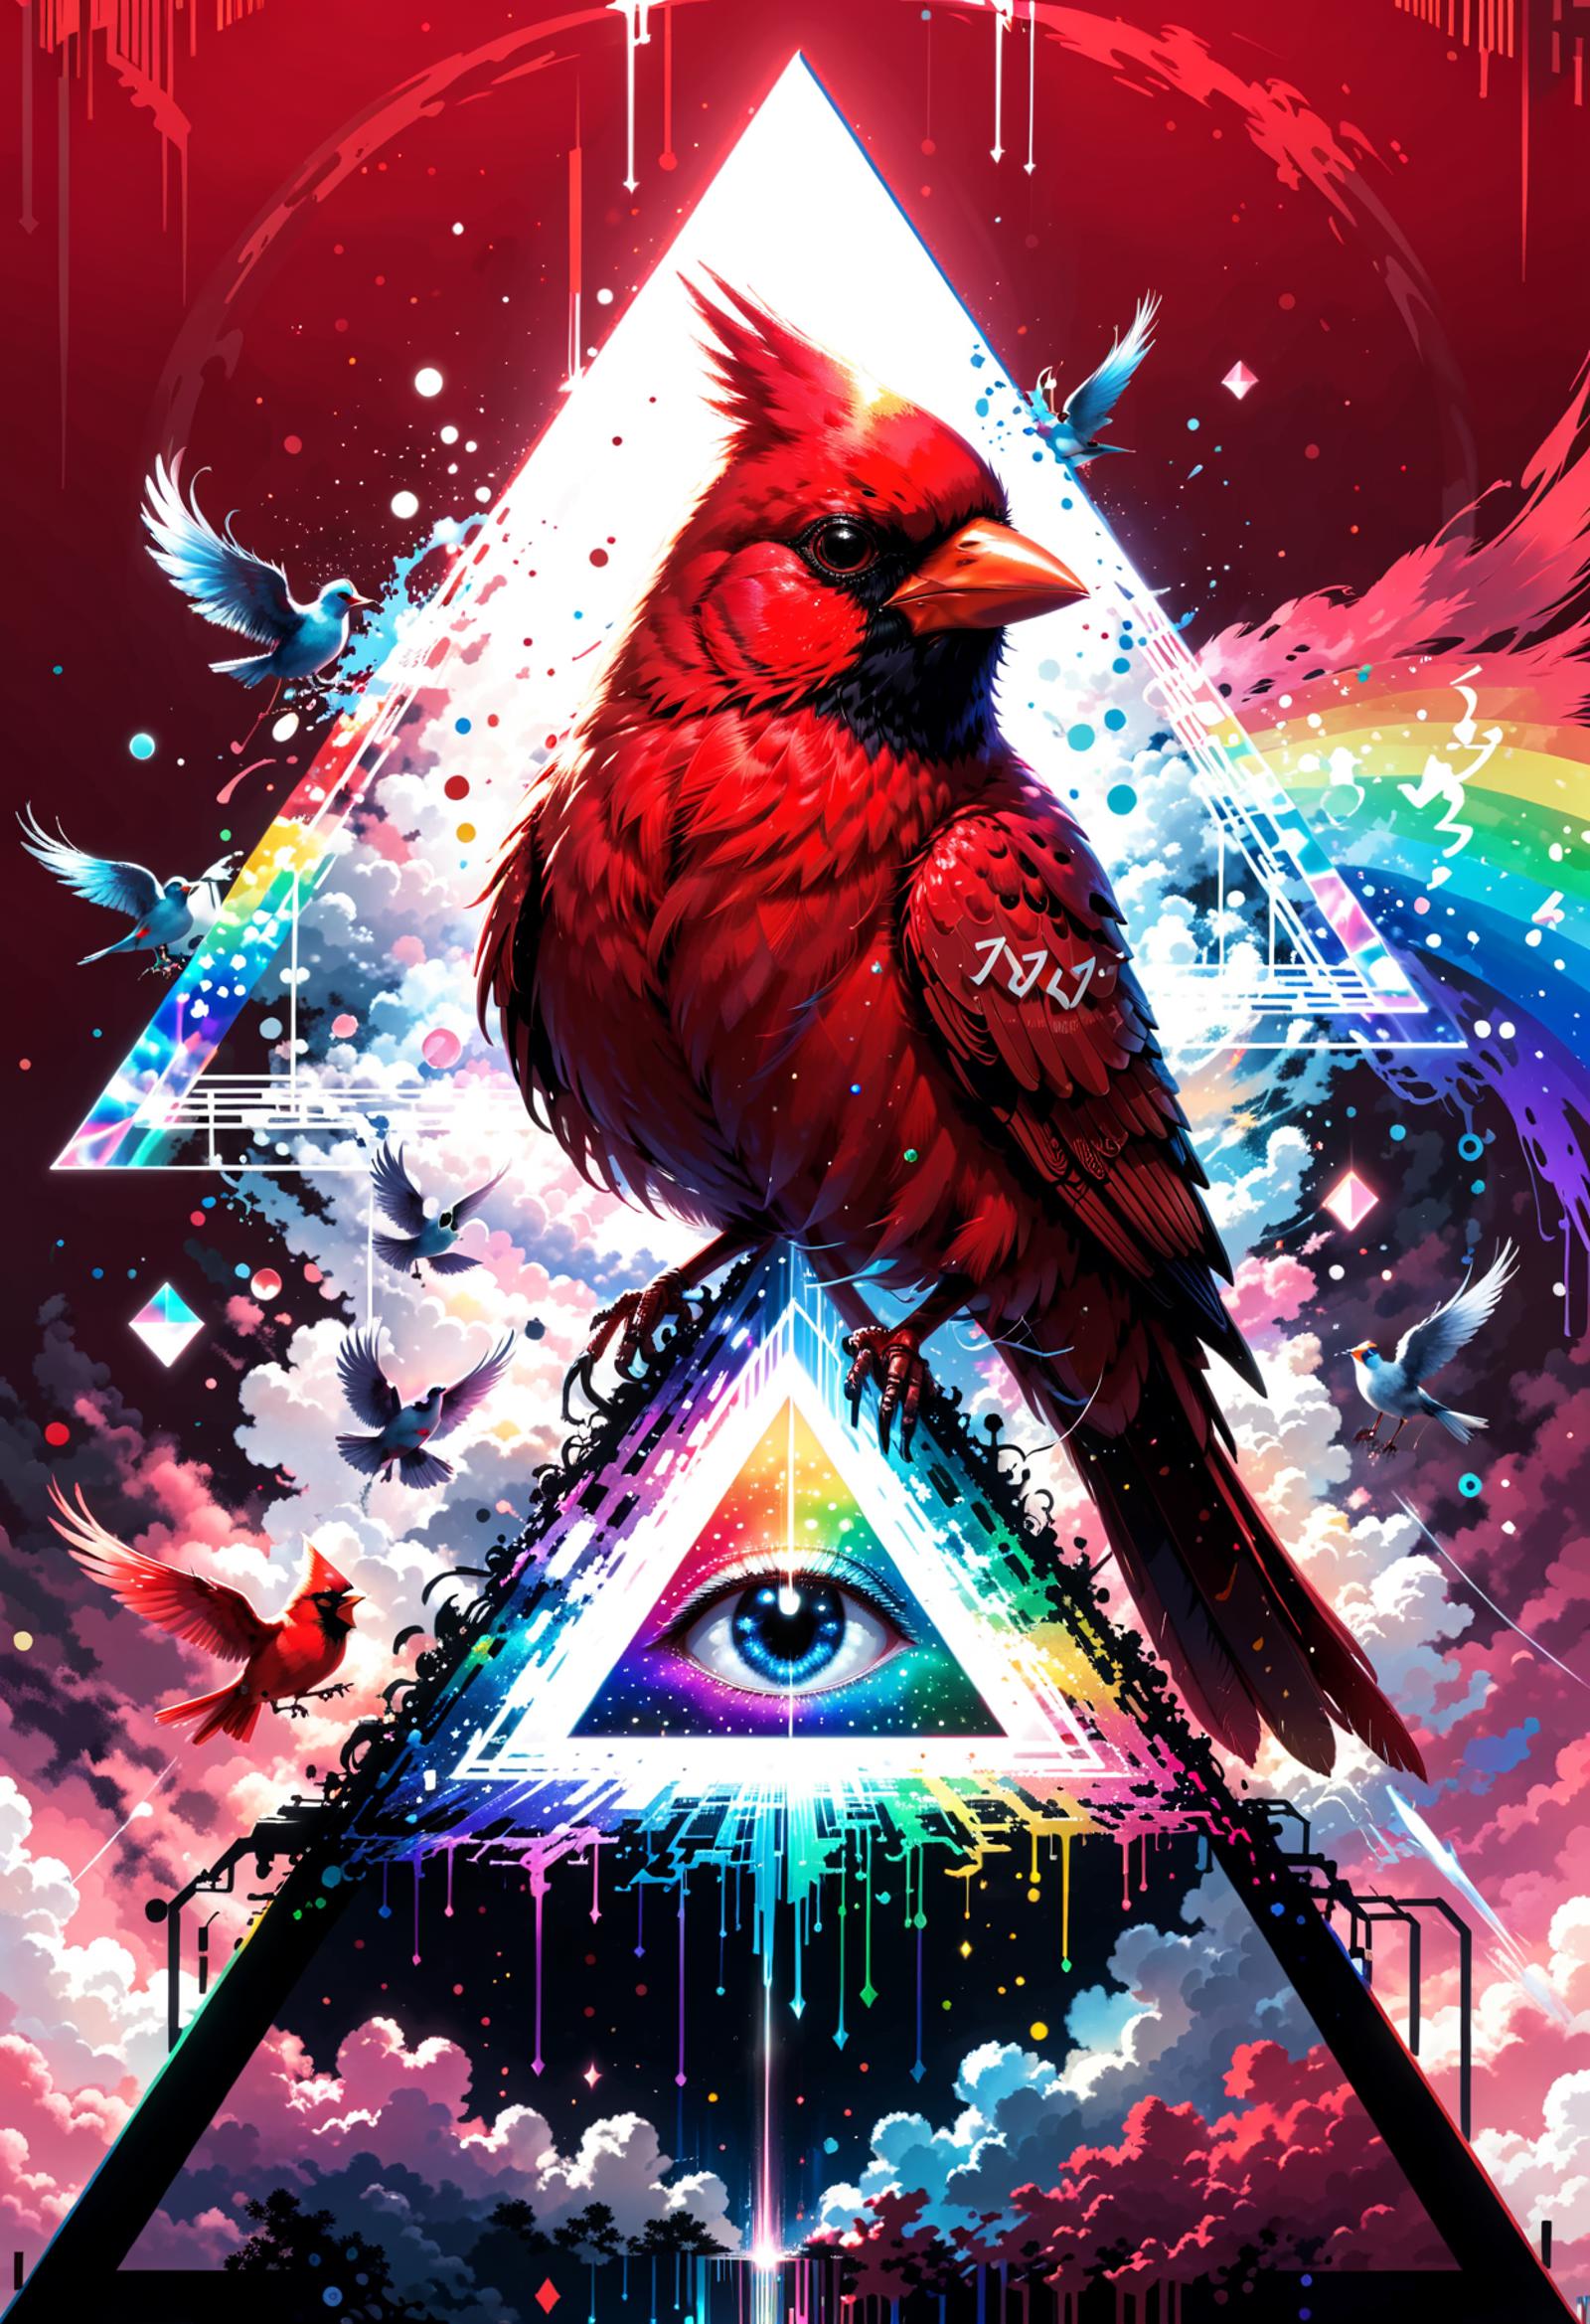 A Red Bird with Black Wings on an Eye Triangle Graphic